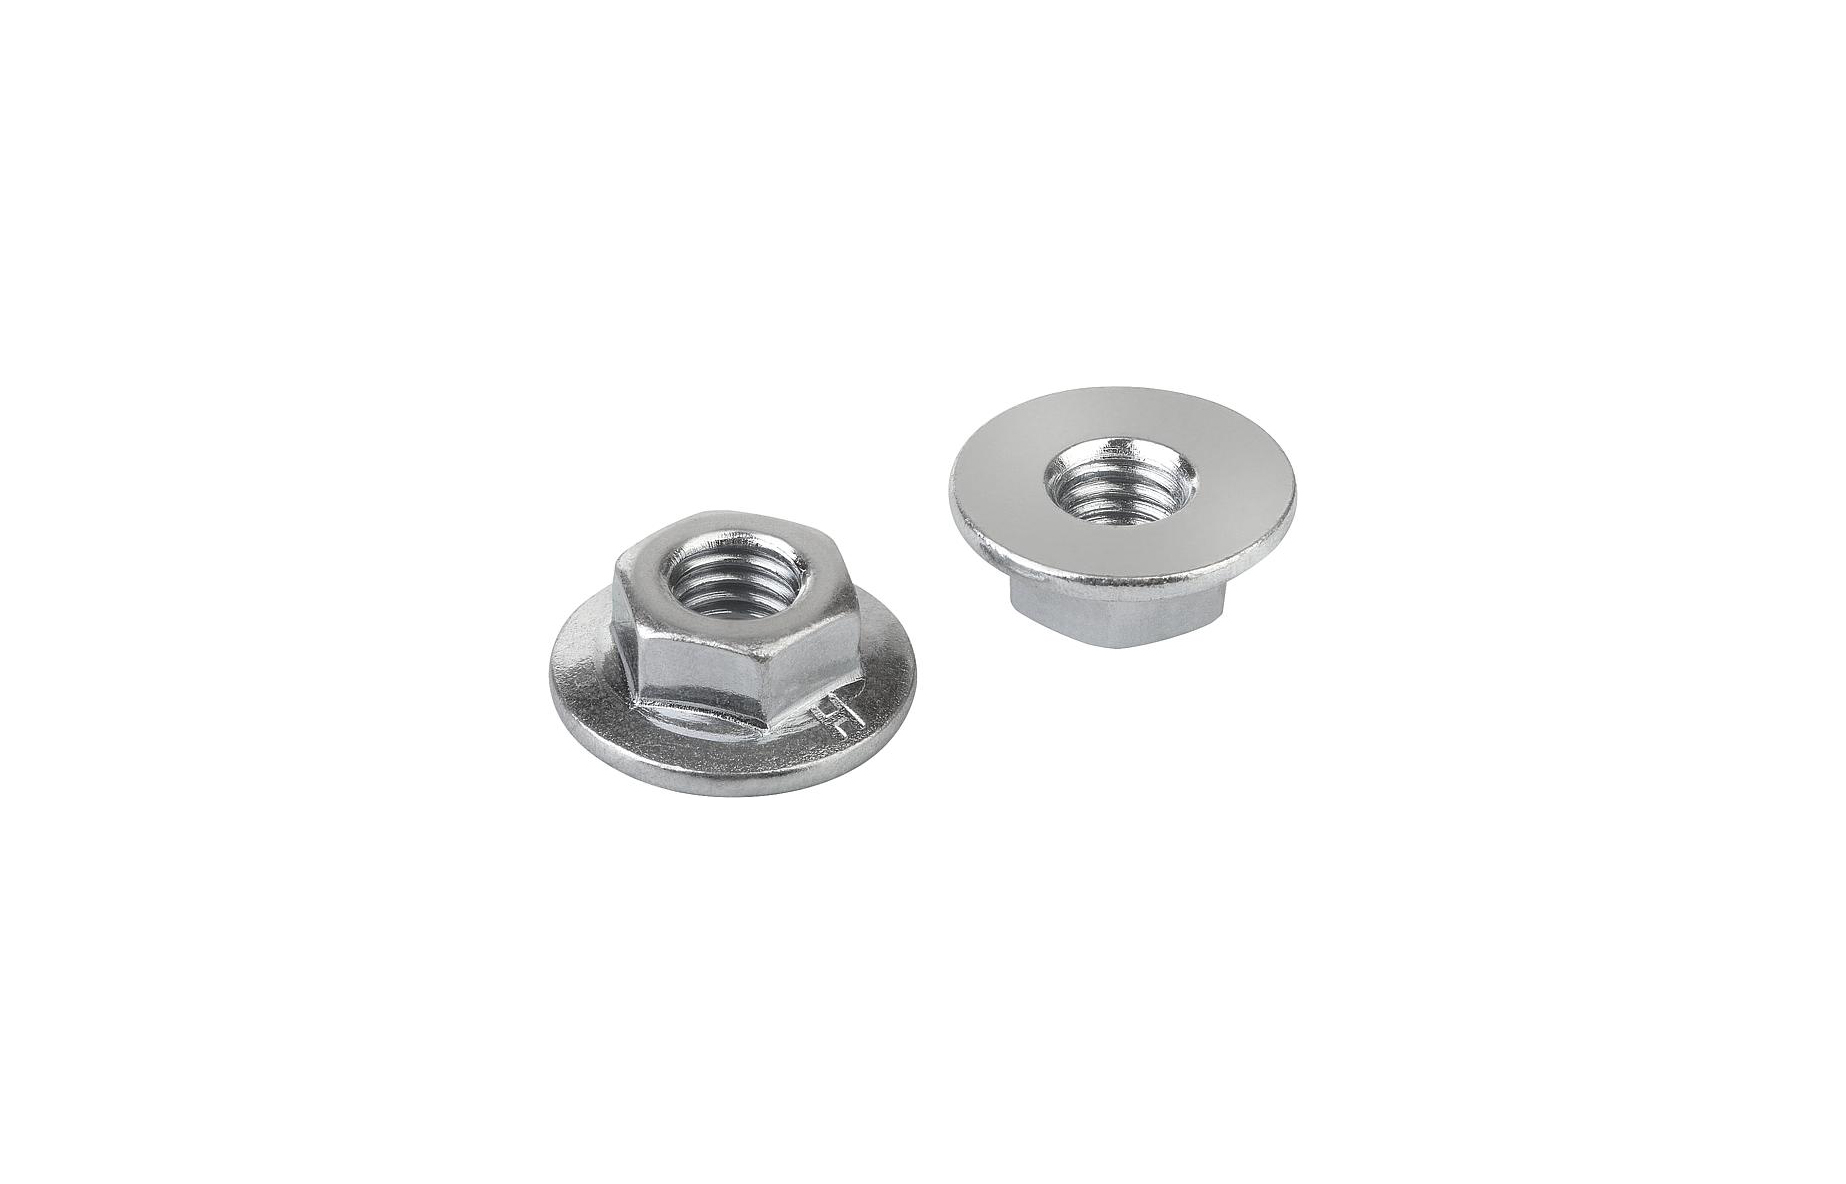 K1030 Hexagon nuts with flange